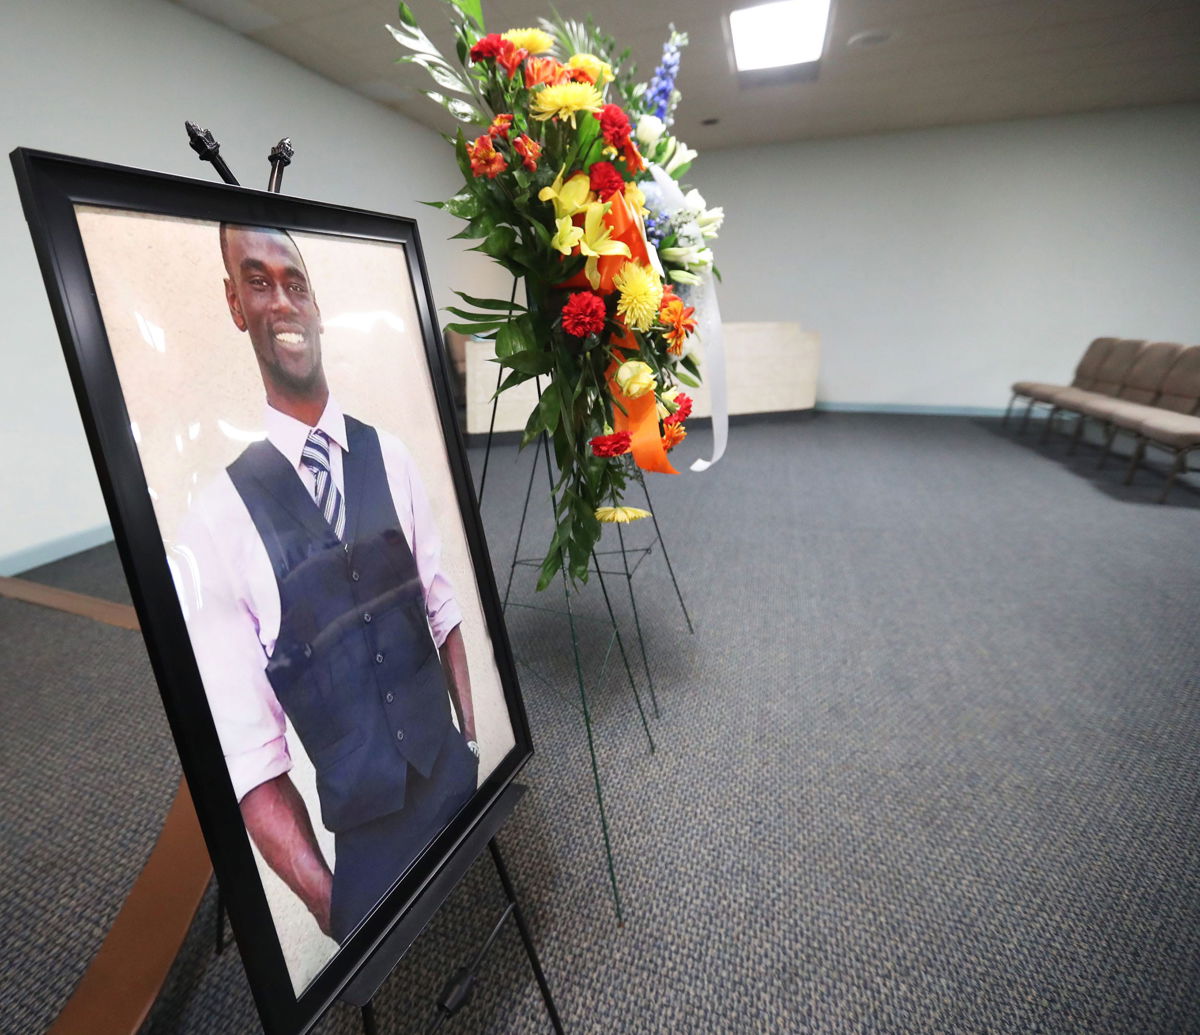 <i>Stu Boyd II/The Commercial Appeal/USA Today Network</i><br/>A Tyre Nichols's memorial was held on January 17 at MJ Edwards Funeral Home in Memphis